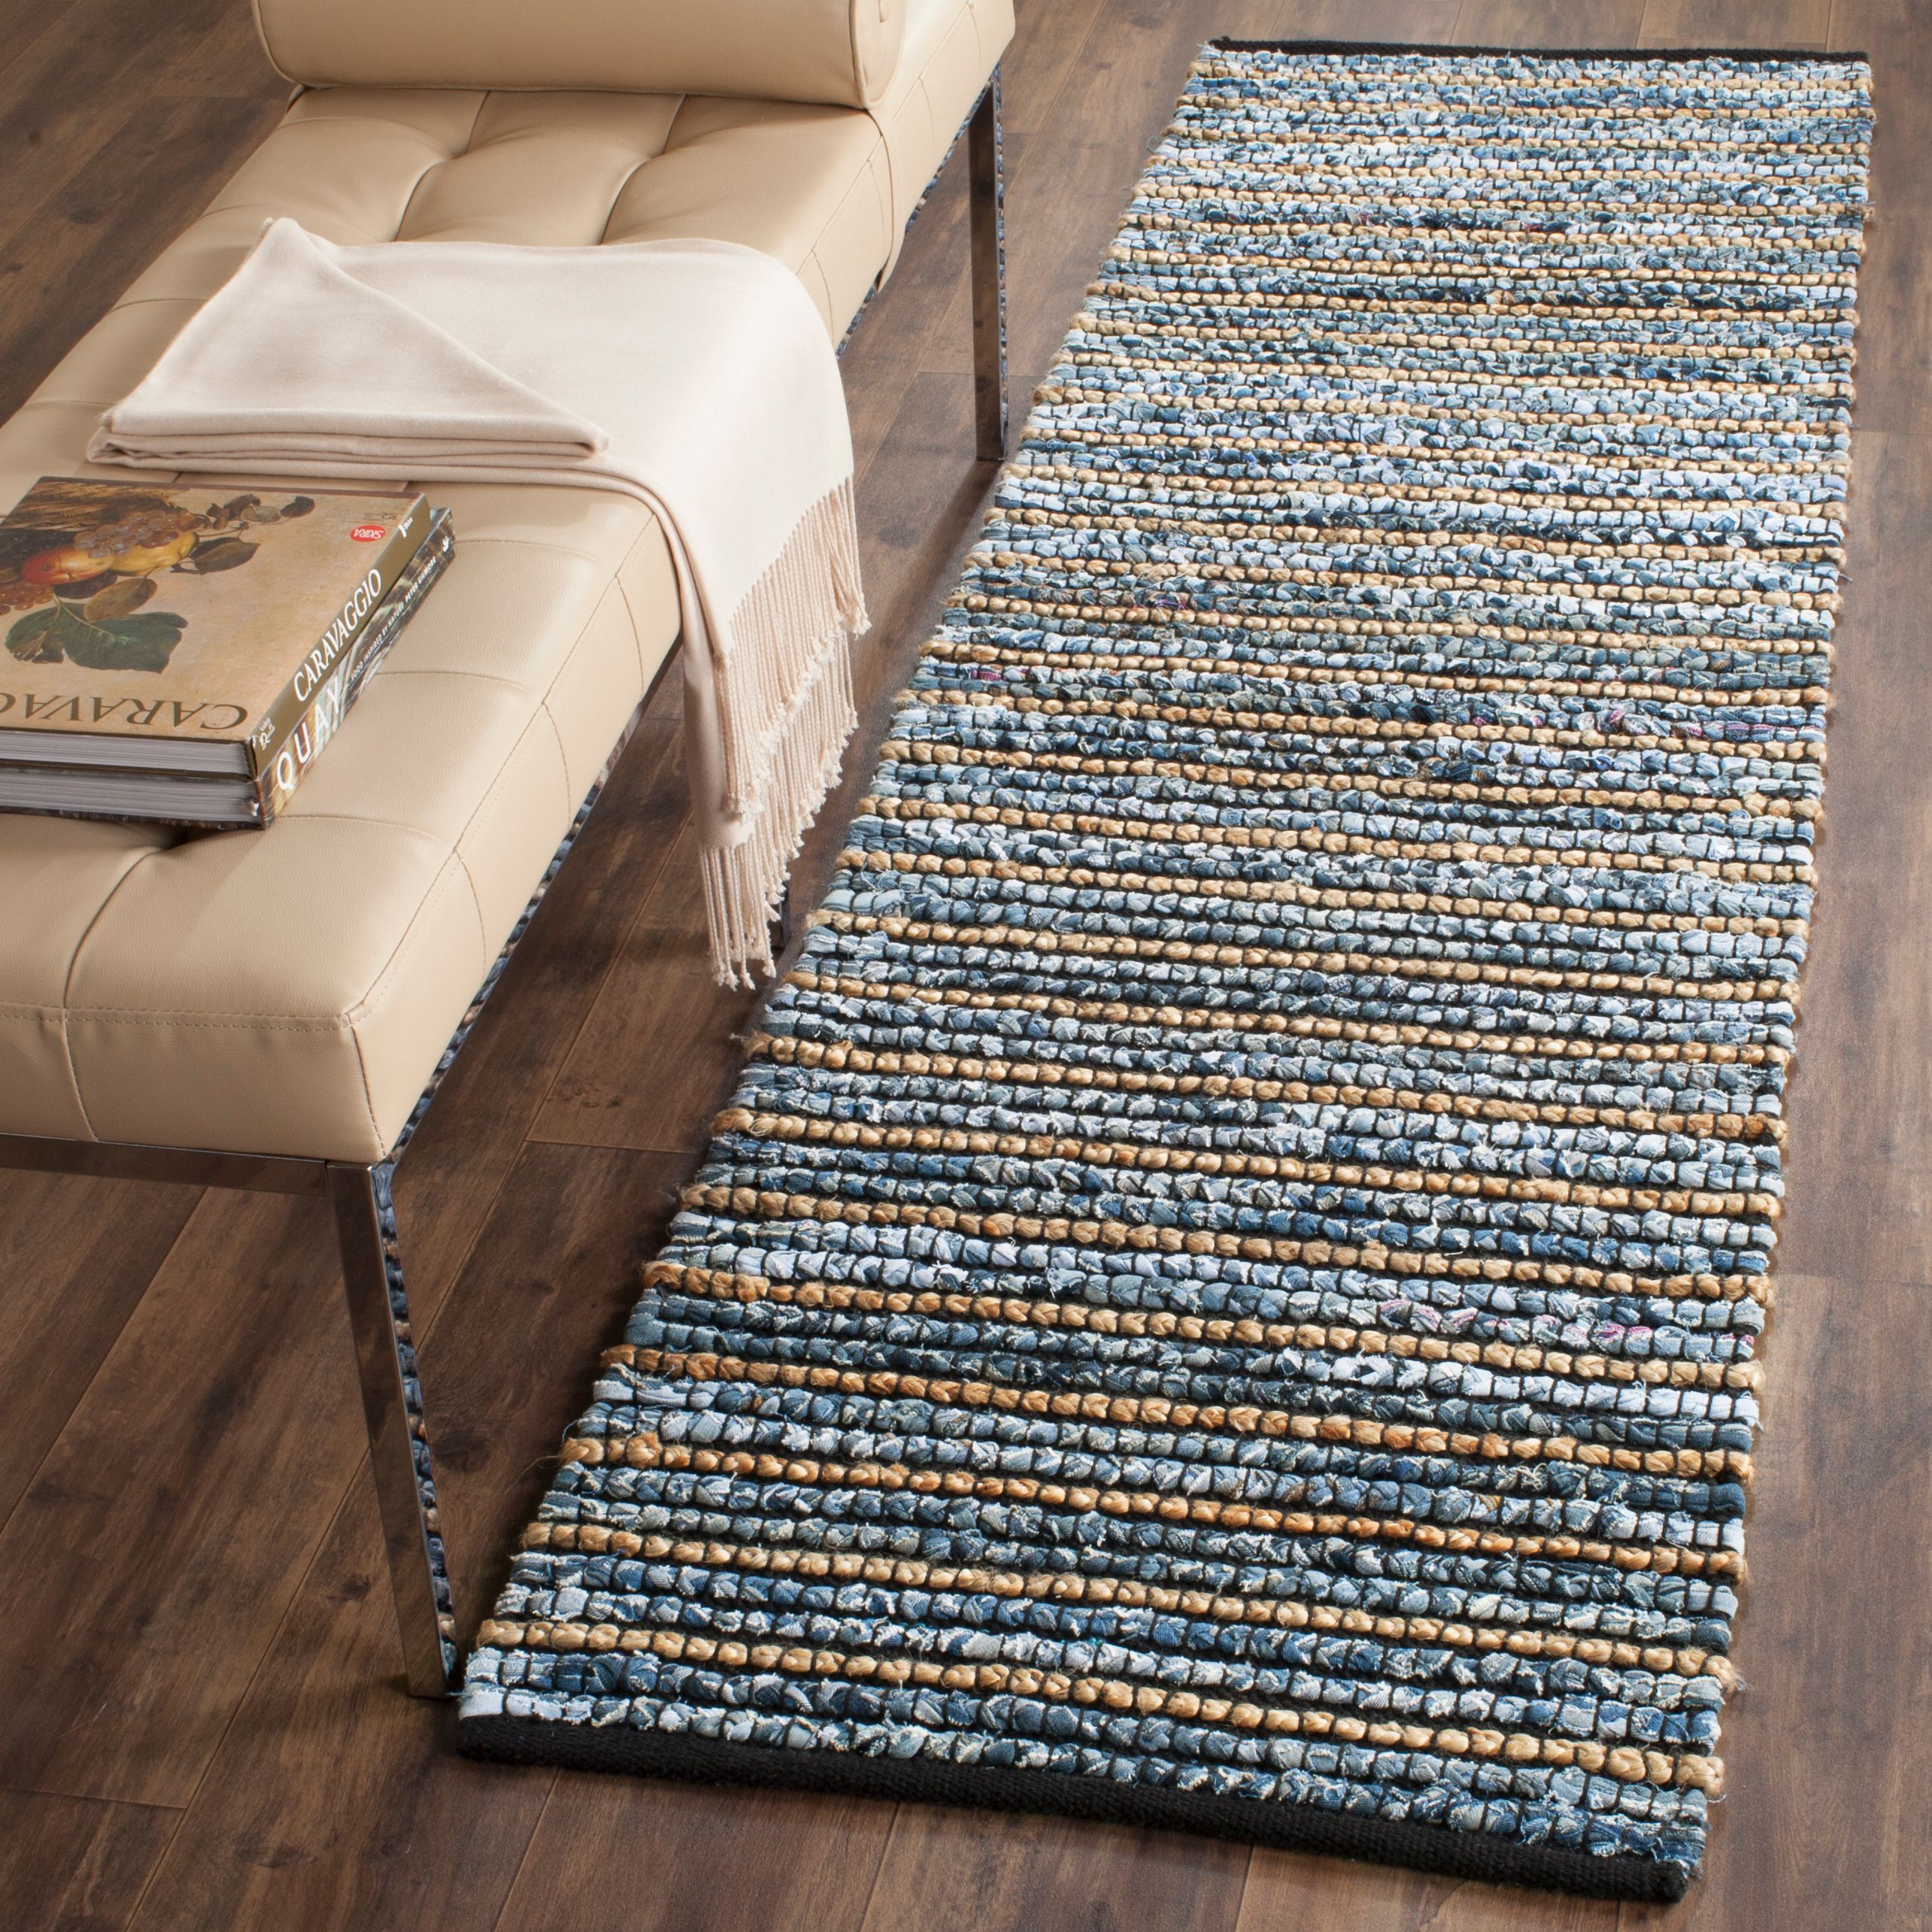 SAFAVIEH Cape Cod Signe Braided Striped Area Rug, 2'3" x 6', Blue/Natural - image 1 of 6